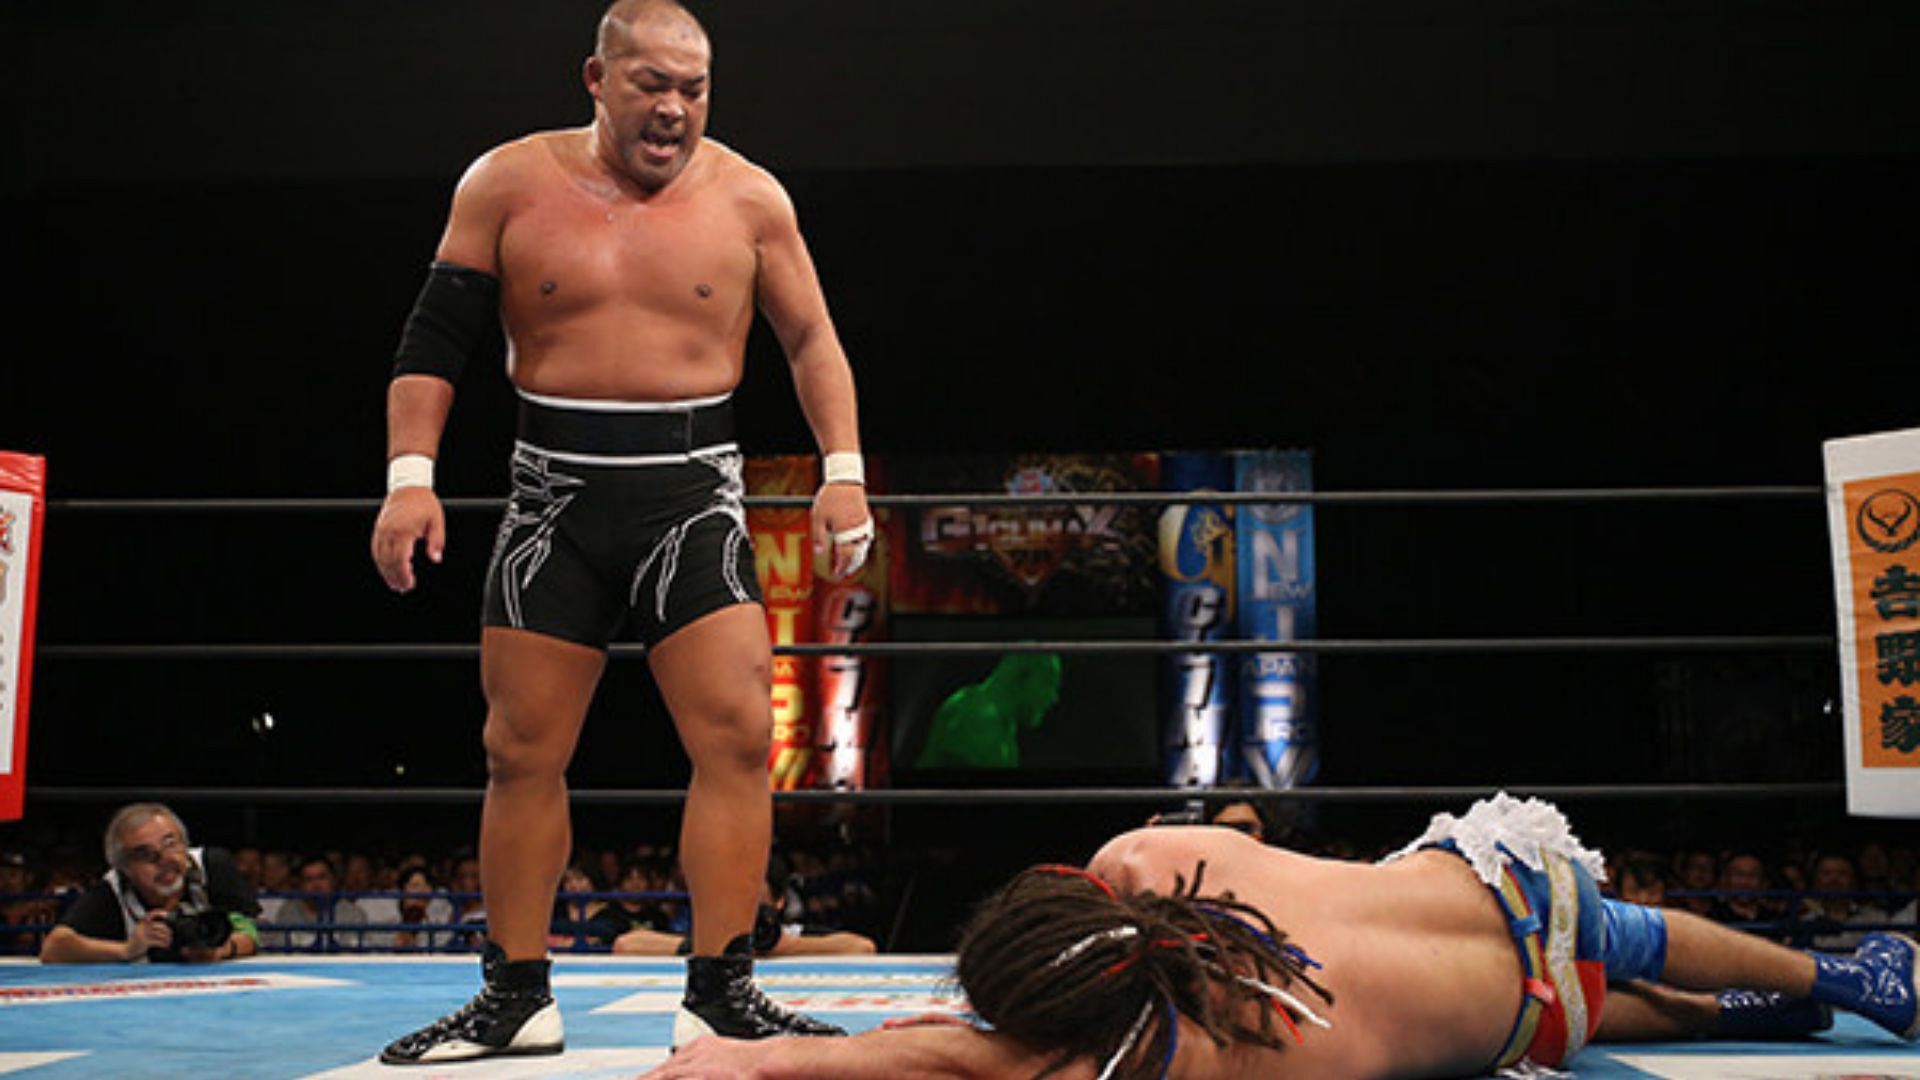 Tomohiro Ishii will be making his AEW debut on the upcoming Dynamite